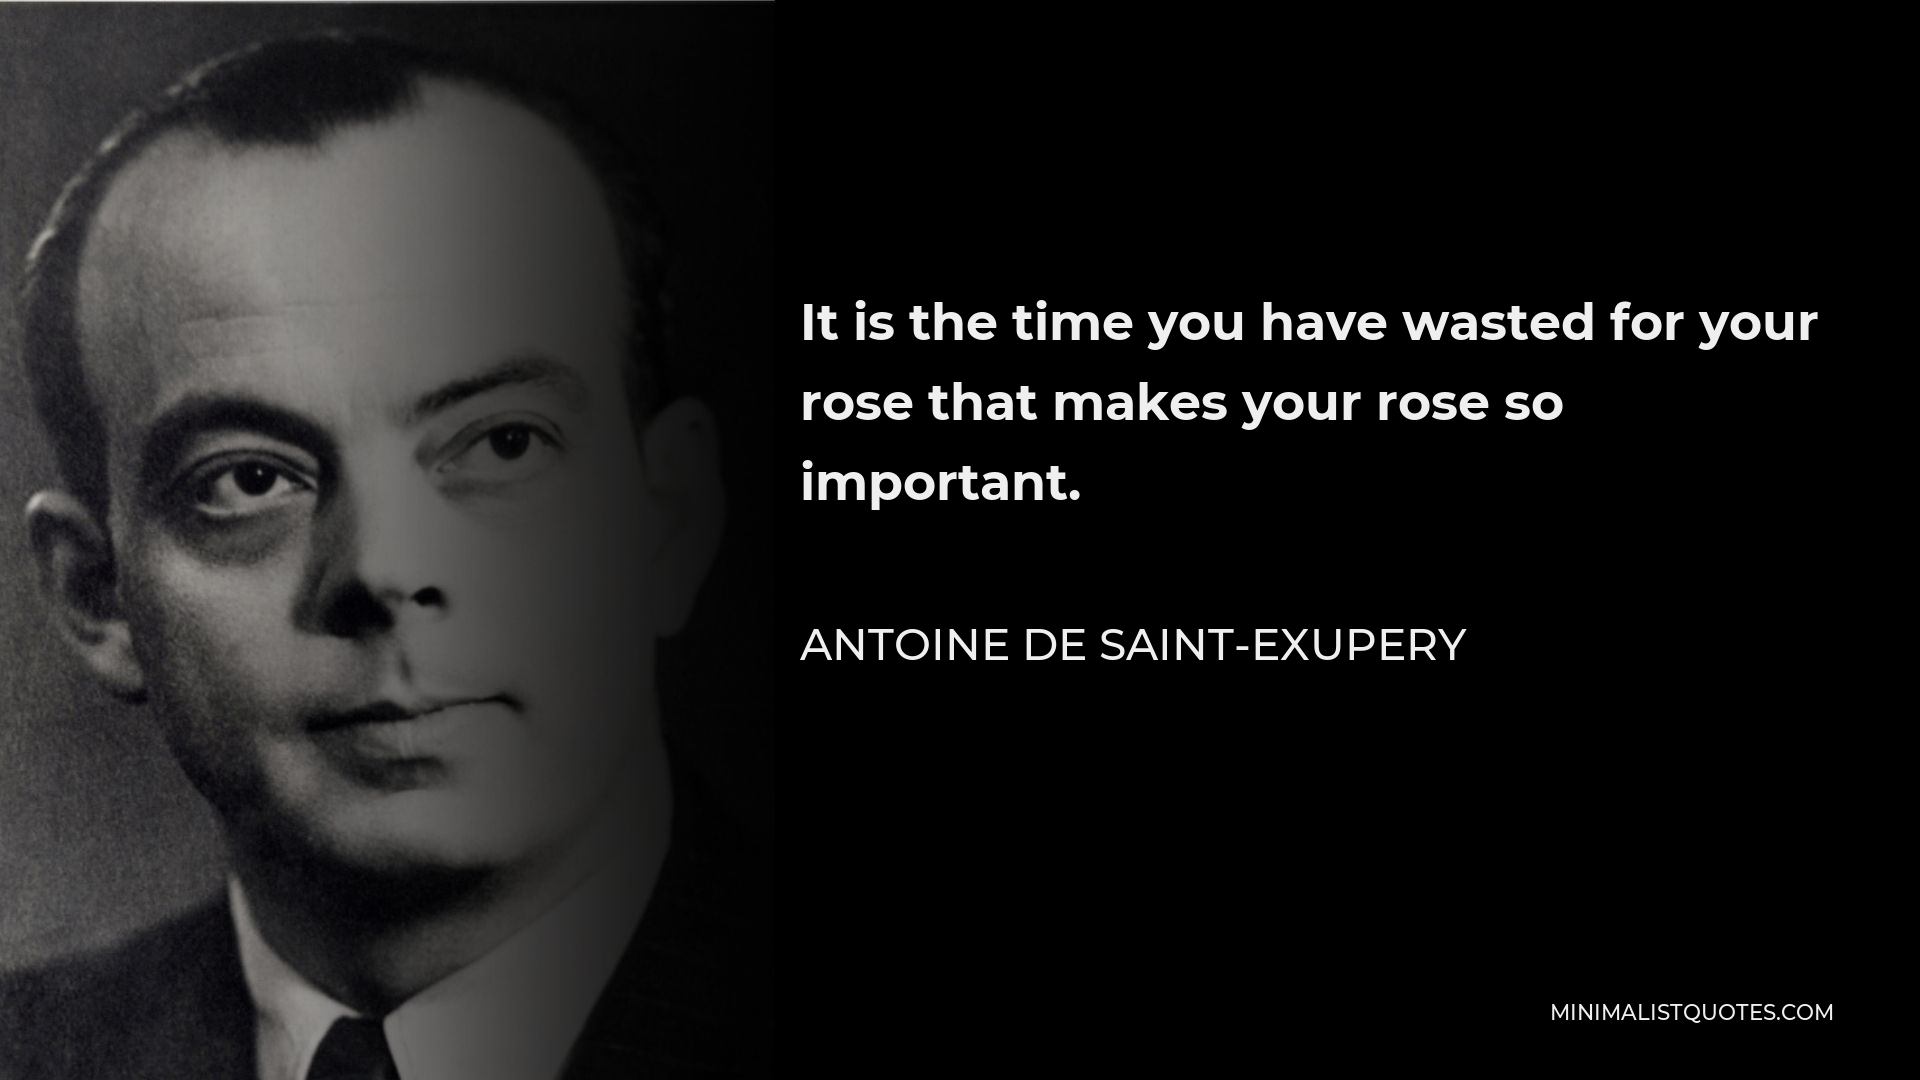 Antoine de Saint-Exupery Quote - It is the time you have wasted for your rose that makes your rose so important.